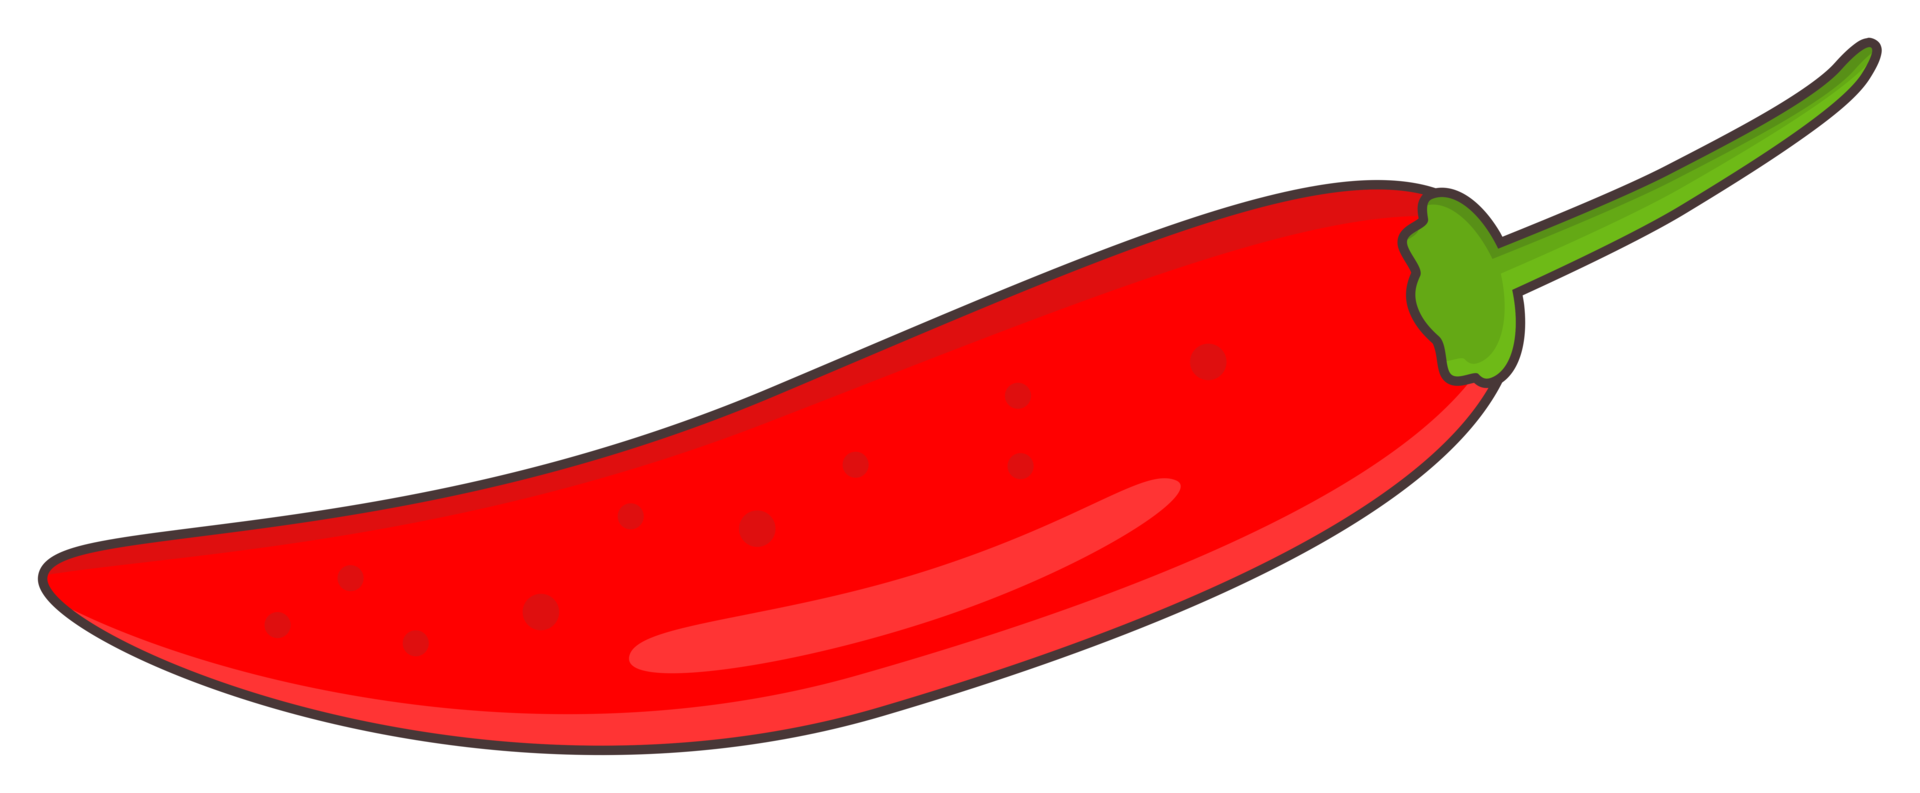 chilli object sticker png